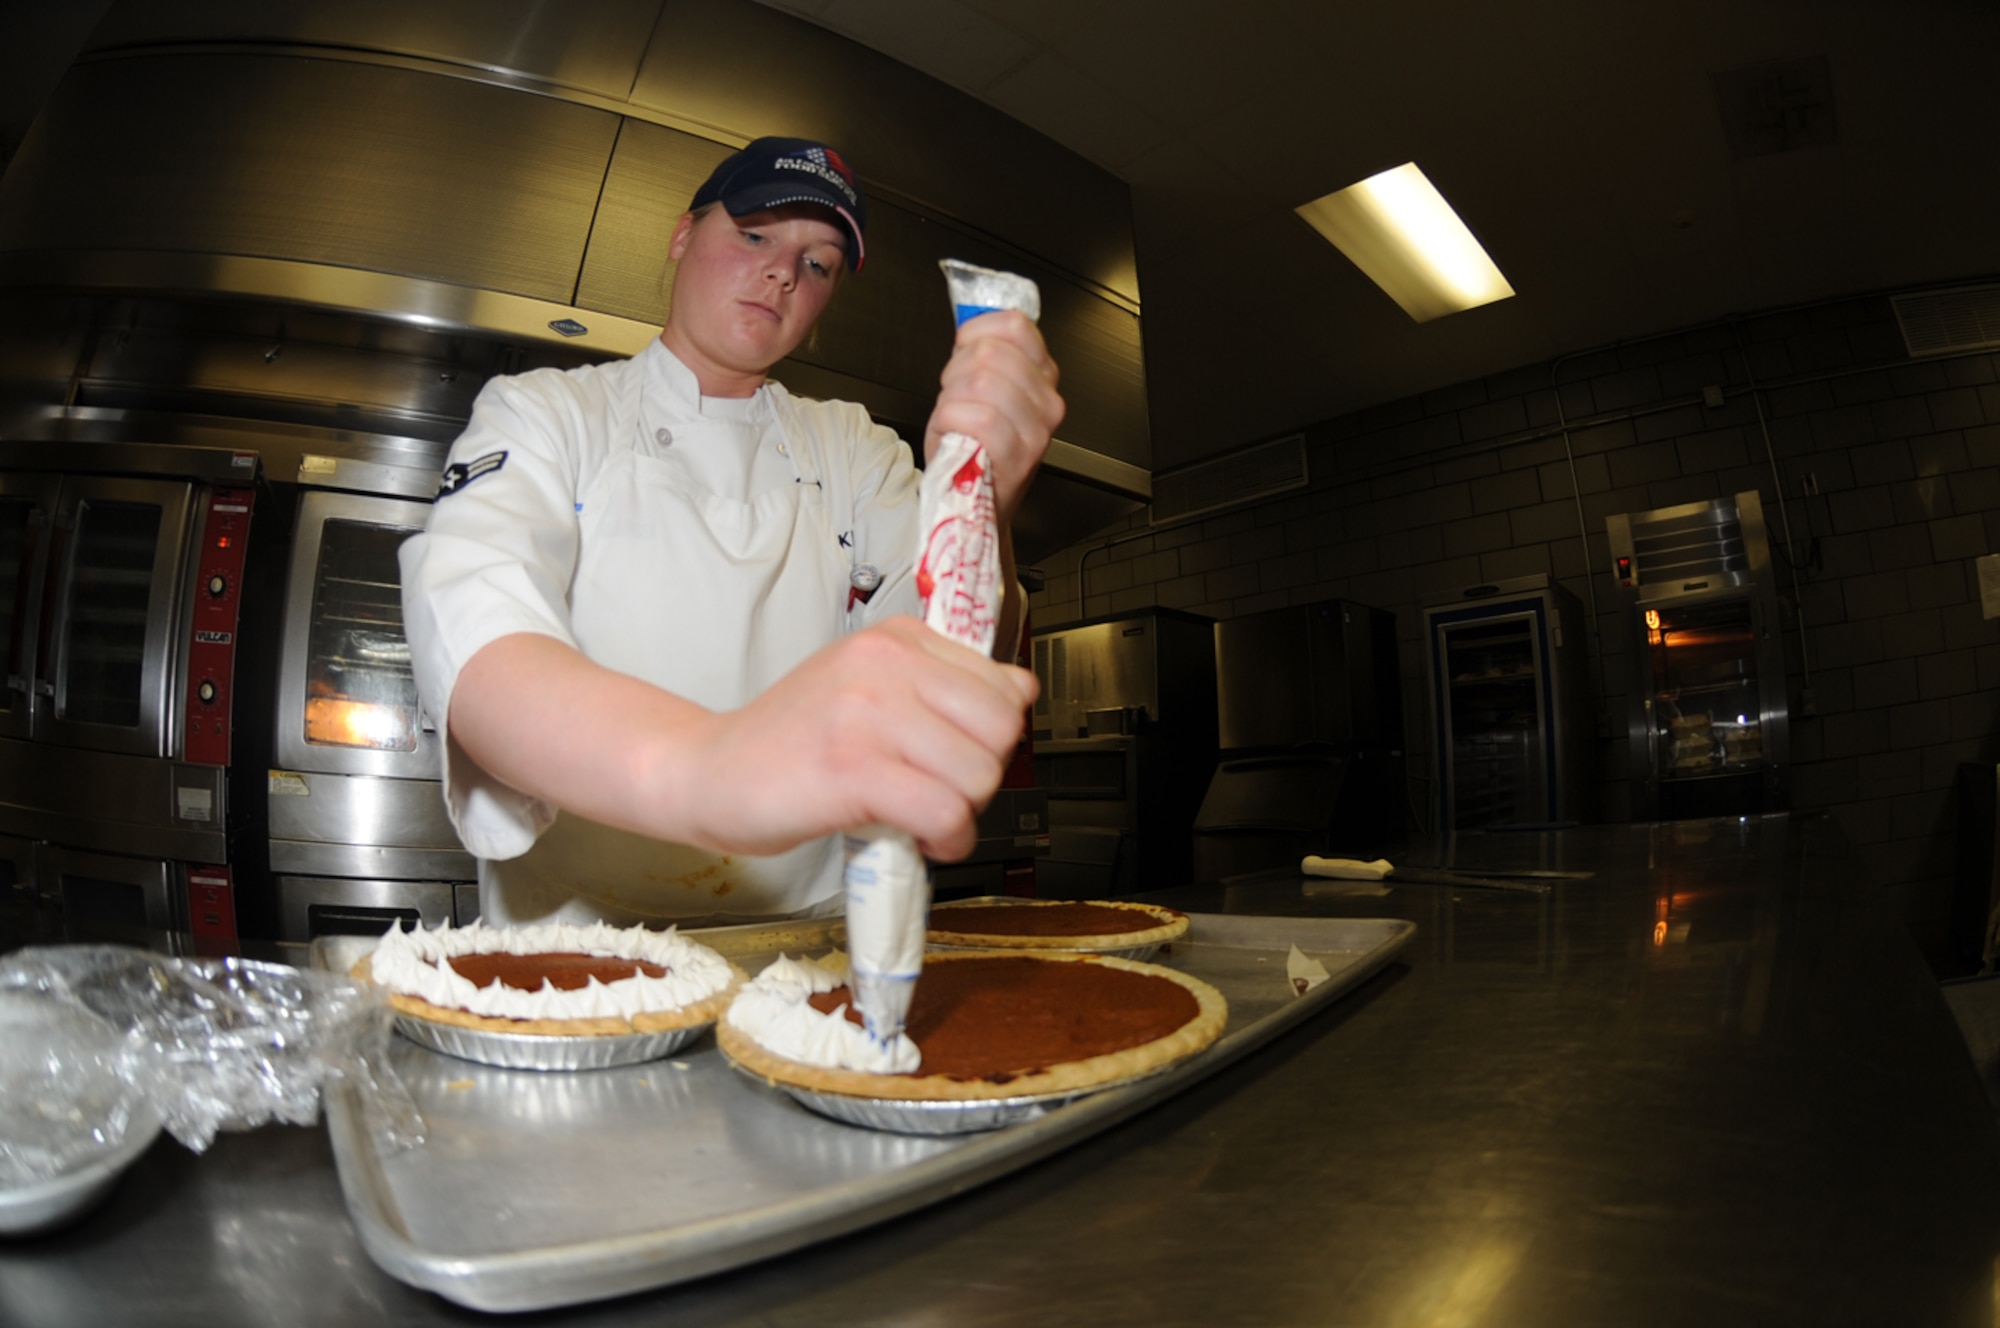 WHITEMAN AIR FORCE BASE, Mo.- Airman 1st Class Holly Kluesner, 509th Force Support Squadron food journeyman, is preparing a pumpkin pie for meal service. Attention to detail in all areas of the Ozark Inn is a driving force behind this award winning facility. (U.S Air Force Photo/ Airman 1st Class Carlin Leslie)